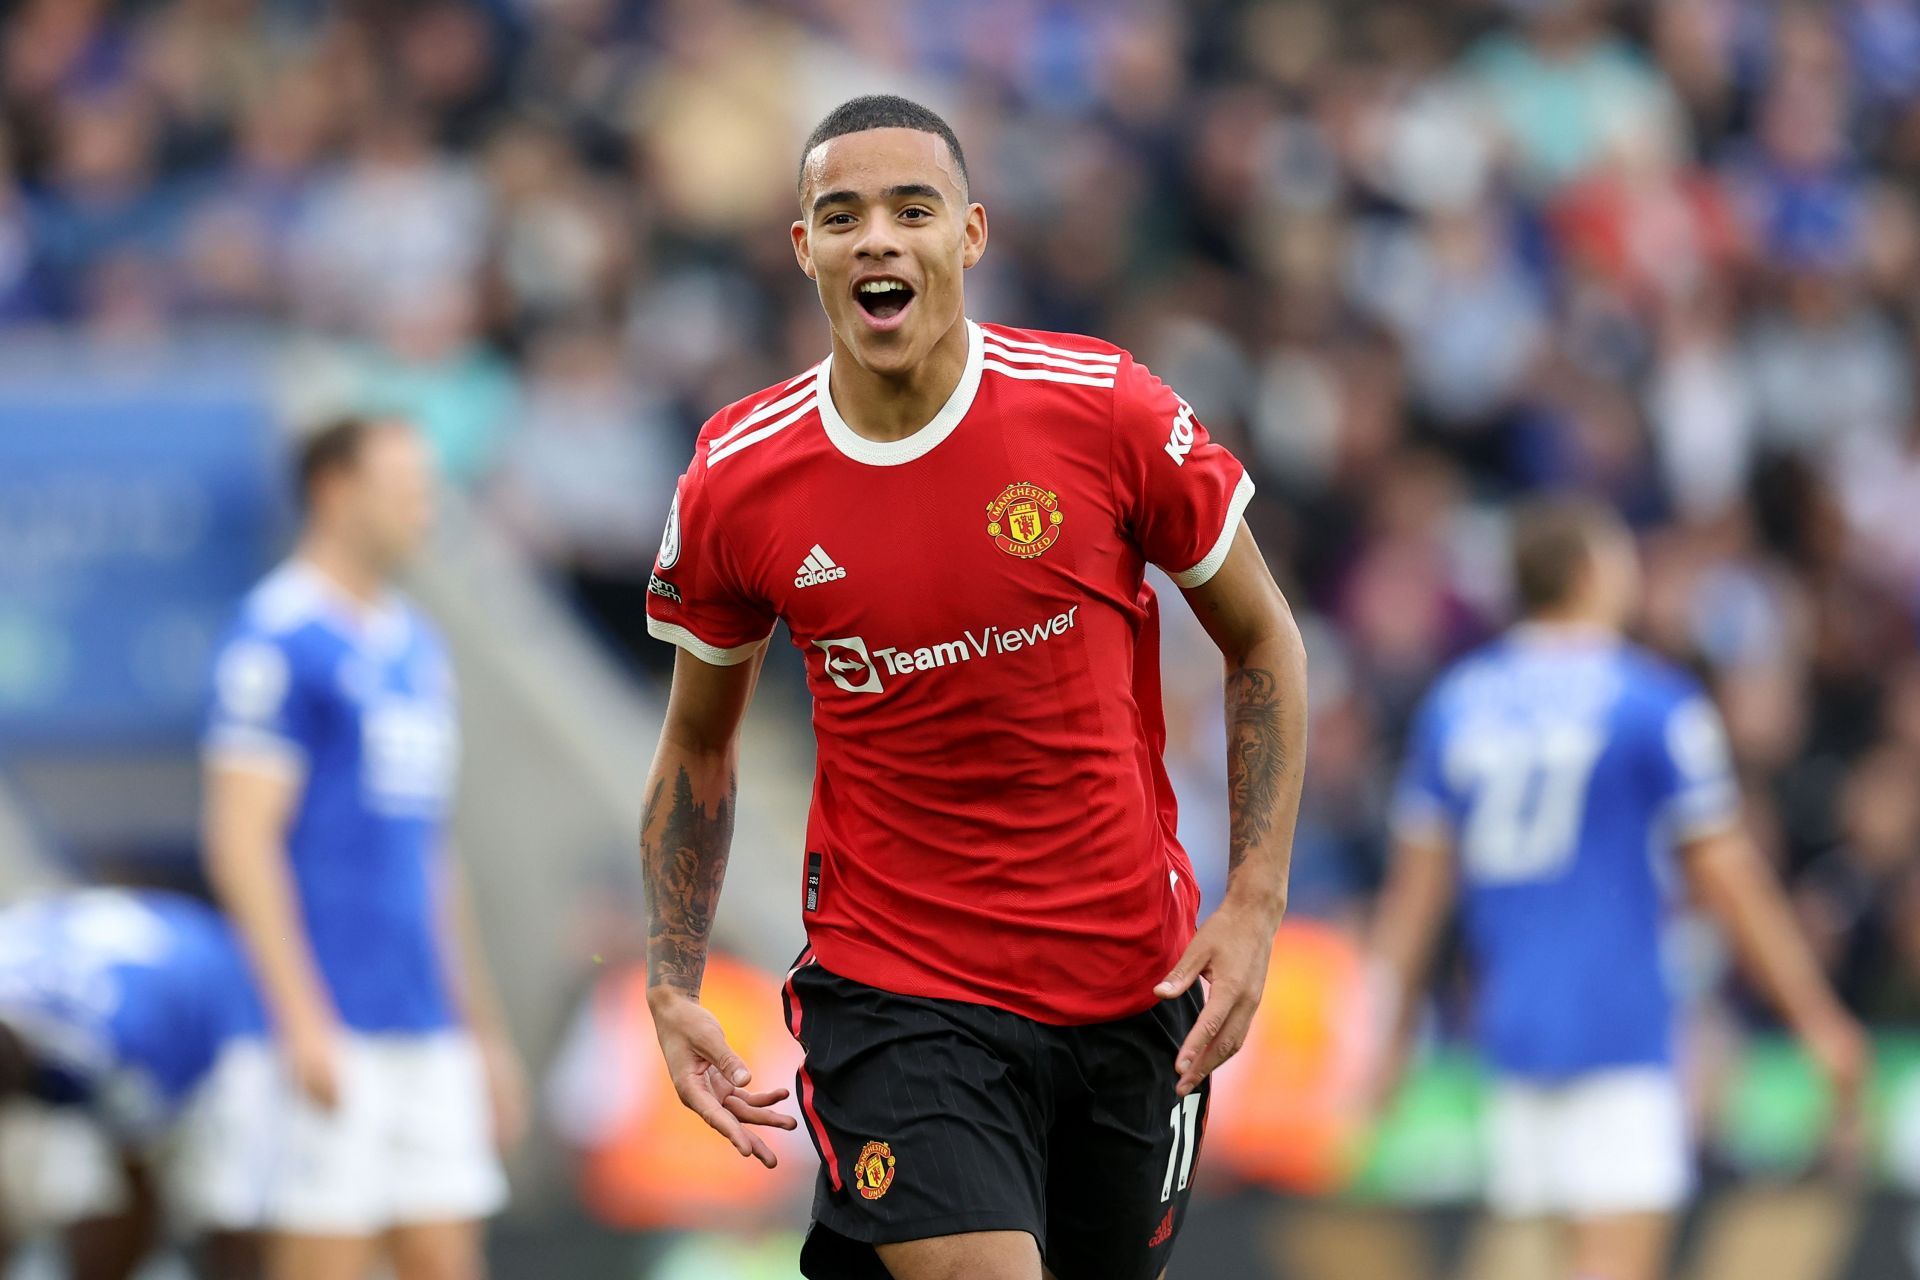 Mason Greenwood has been excellent for Manchester United this term.